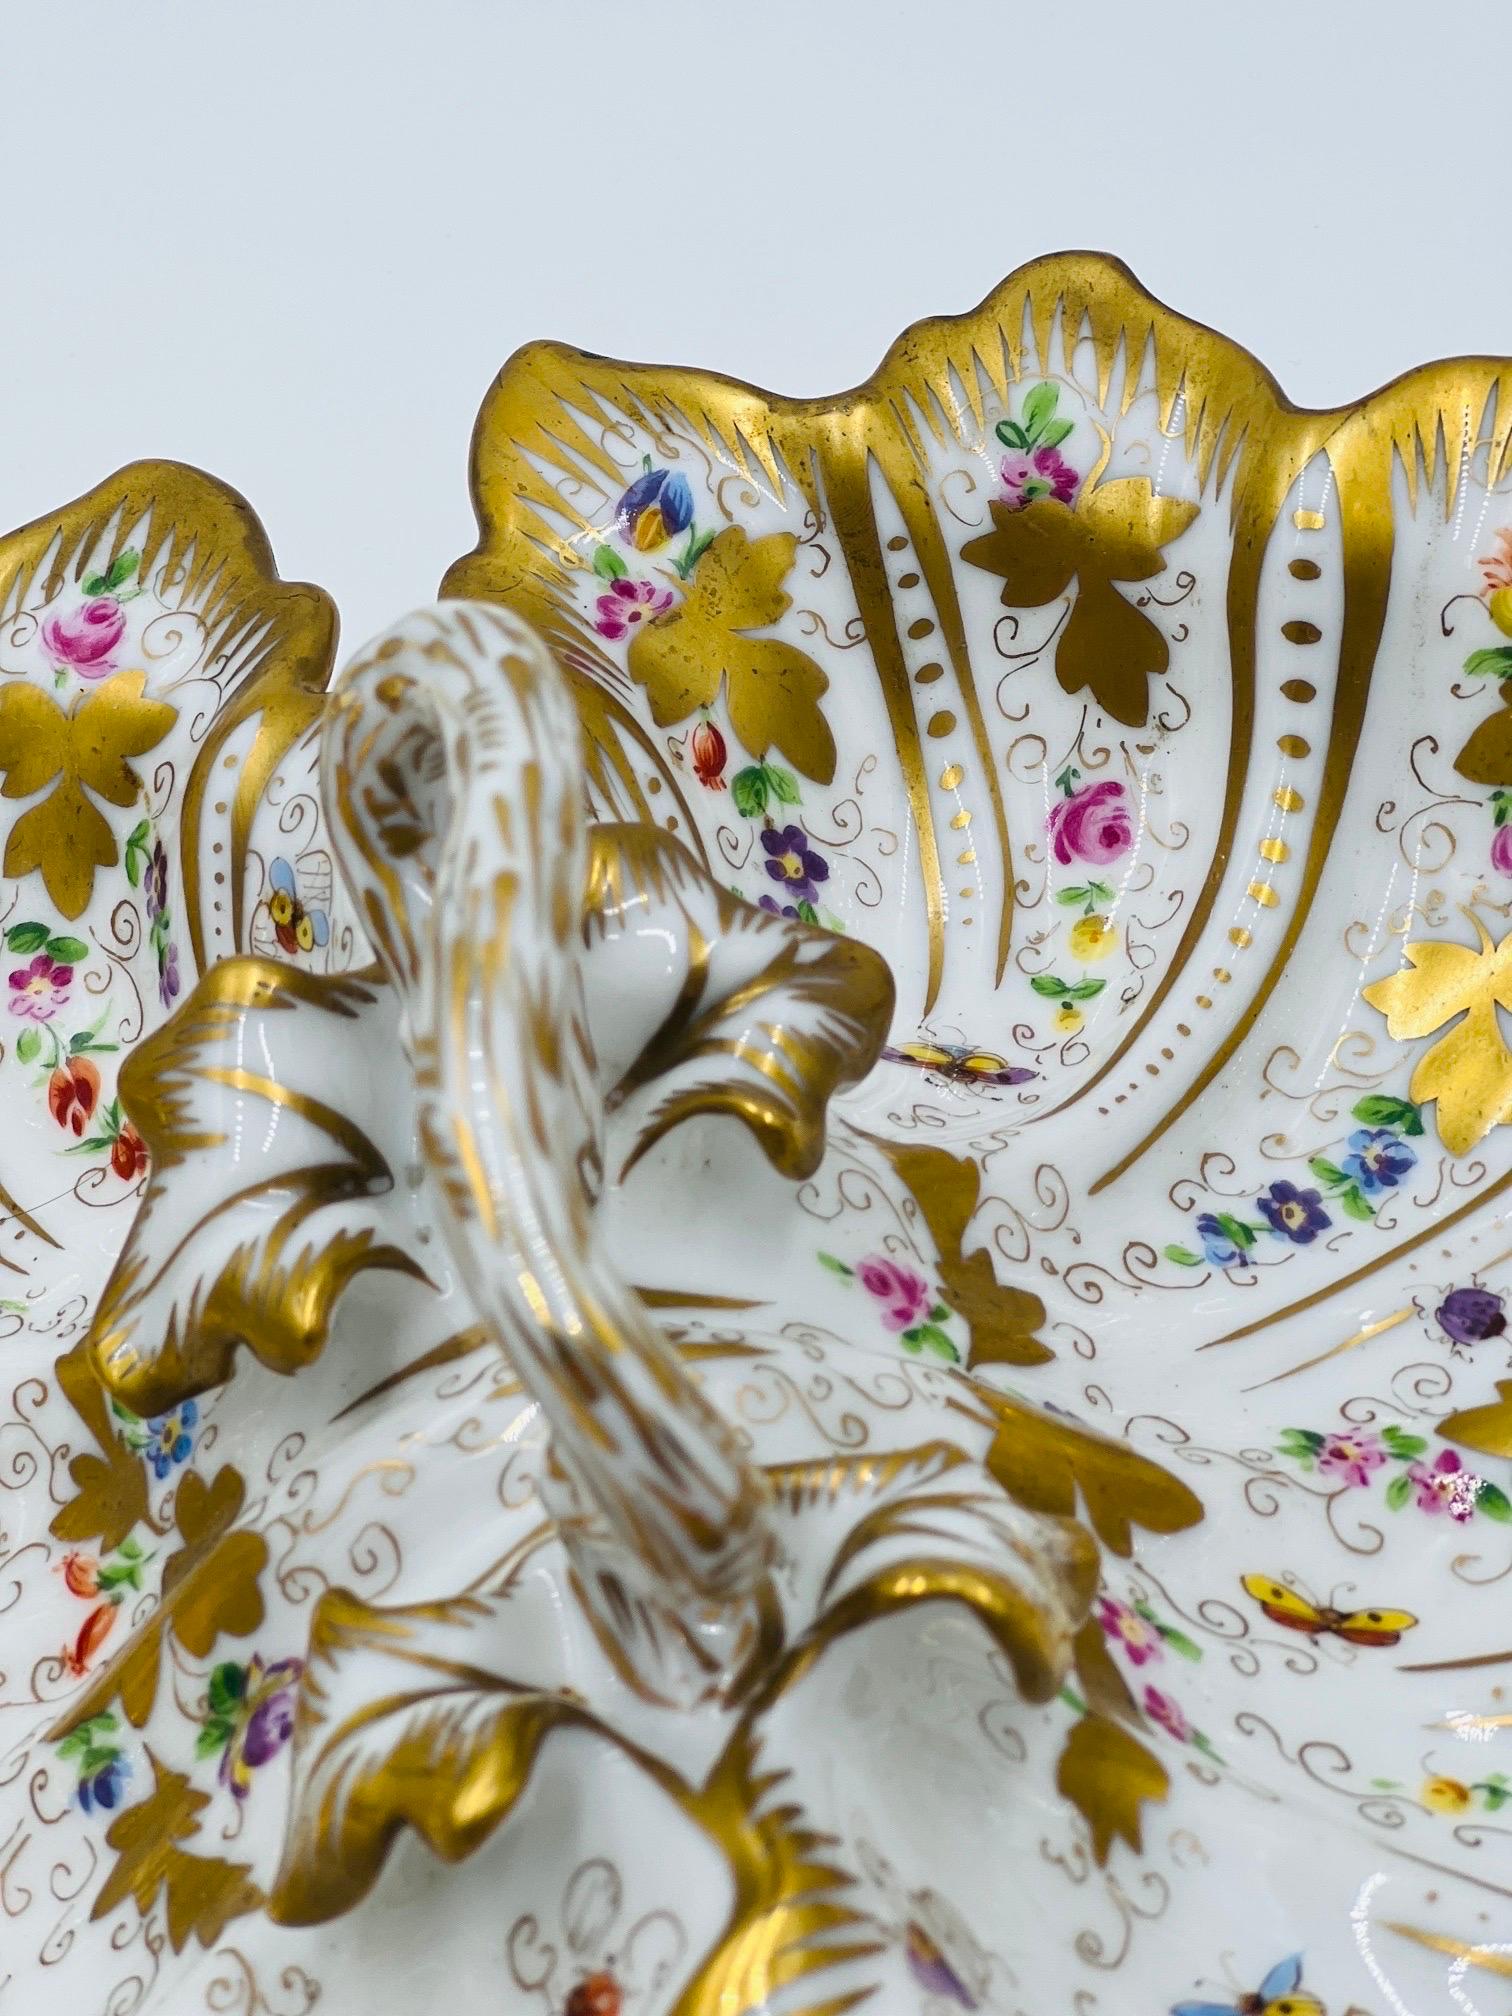 Antique Ornate CT Carl Tielsch Germany Floral Divided Handled Dish Herend Style For Sale 1